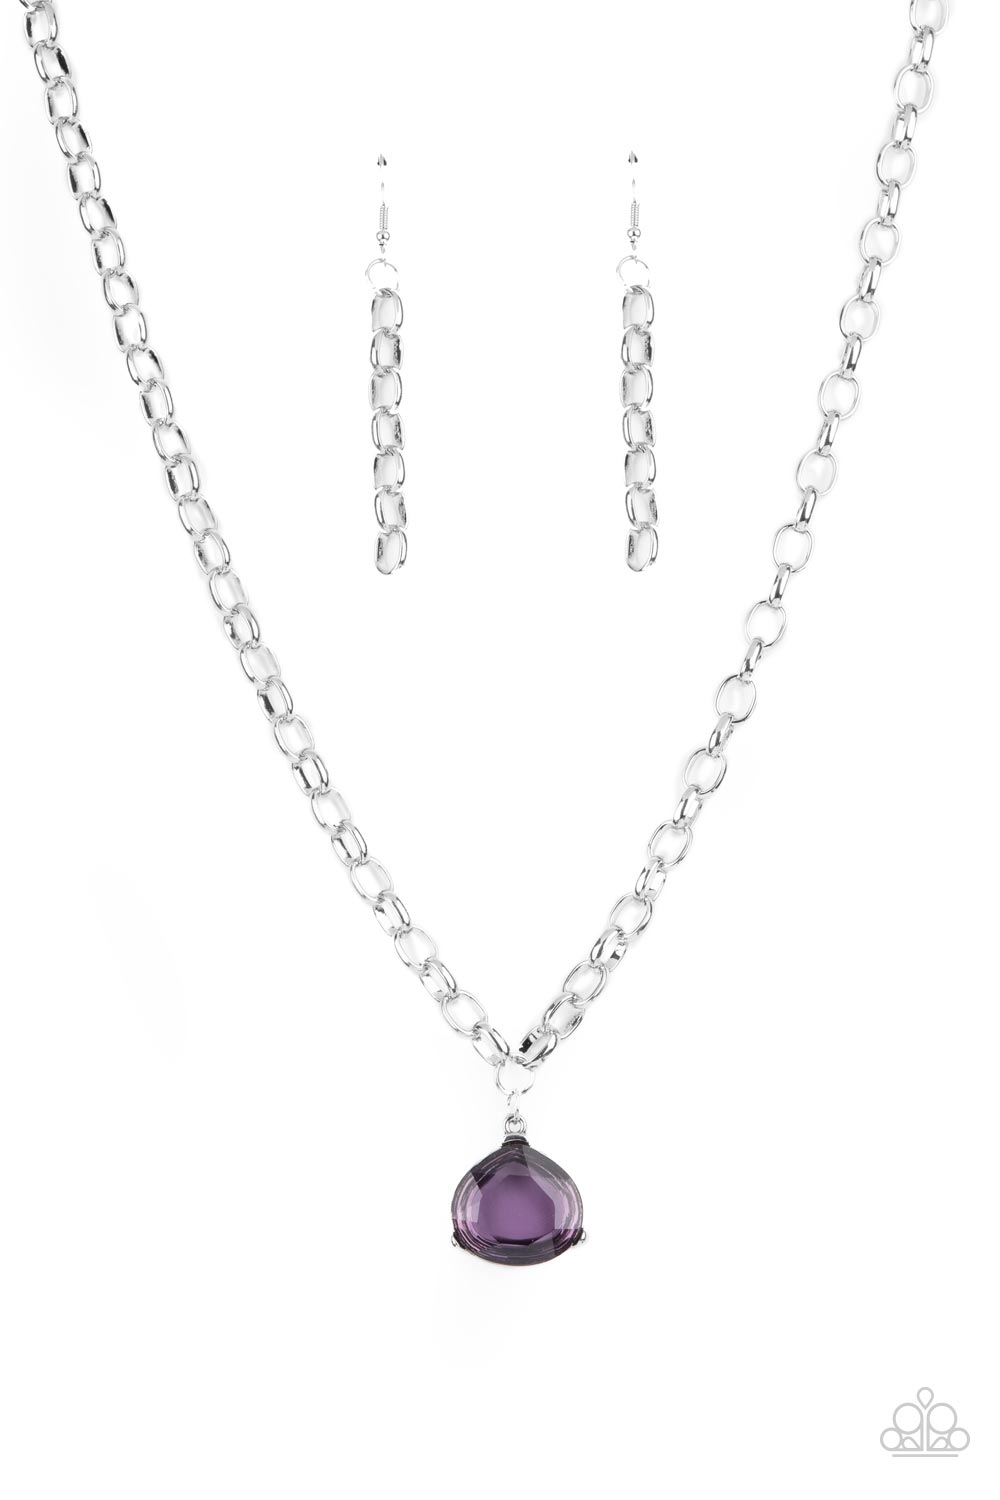 Gallery Gem Necklace (Red, Purple,Silver)